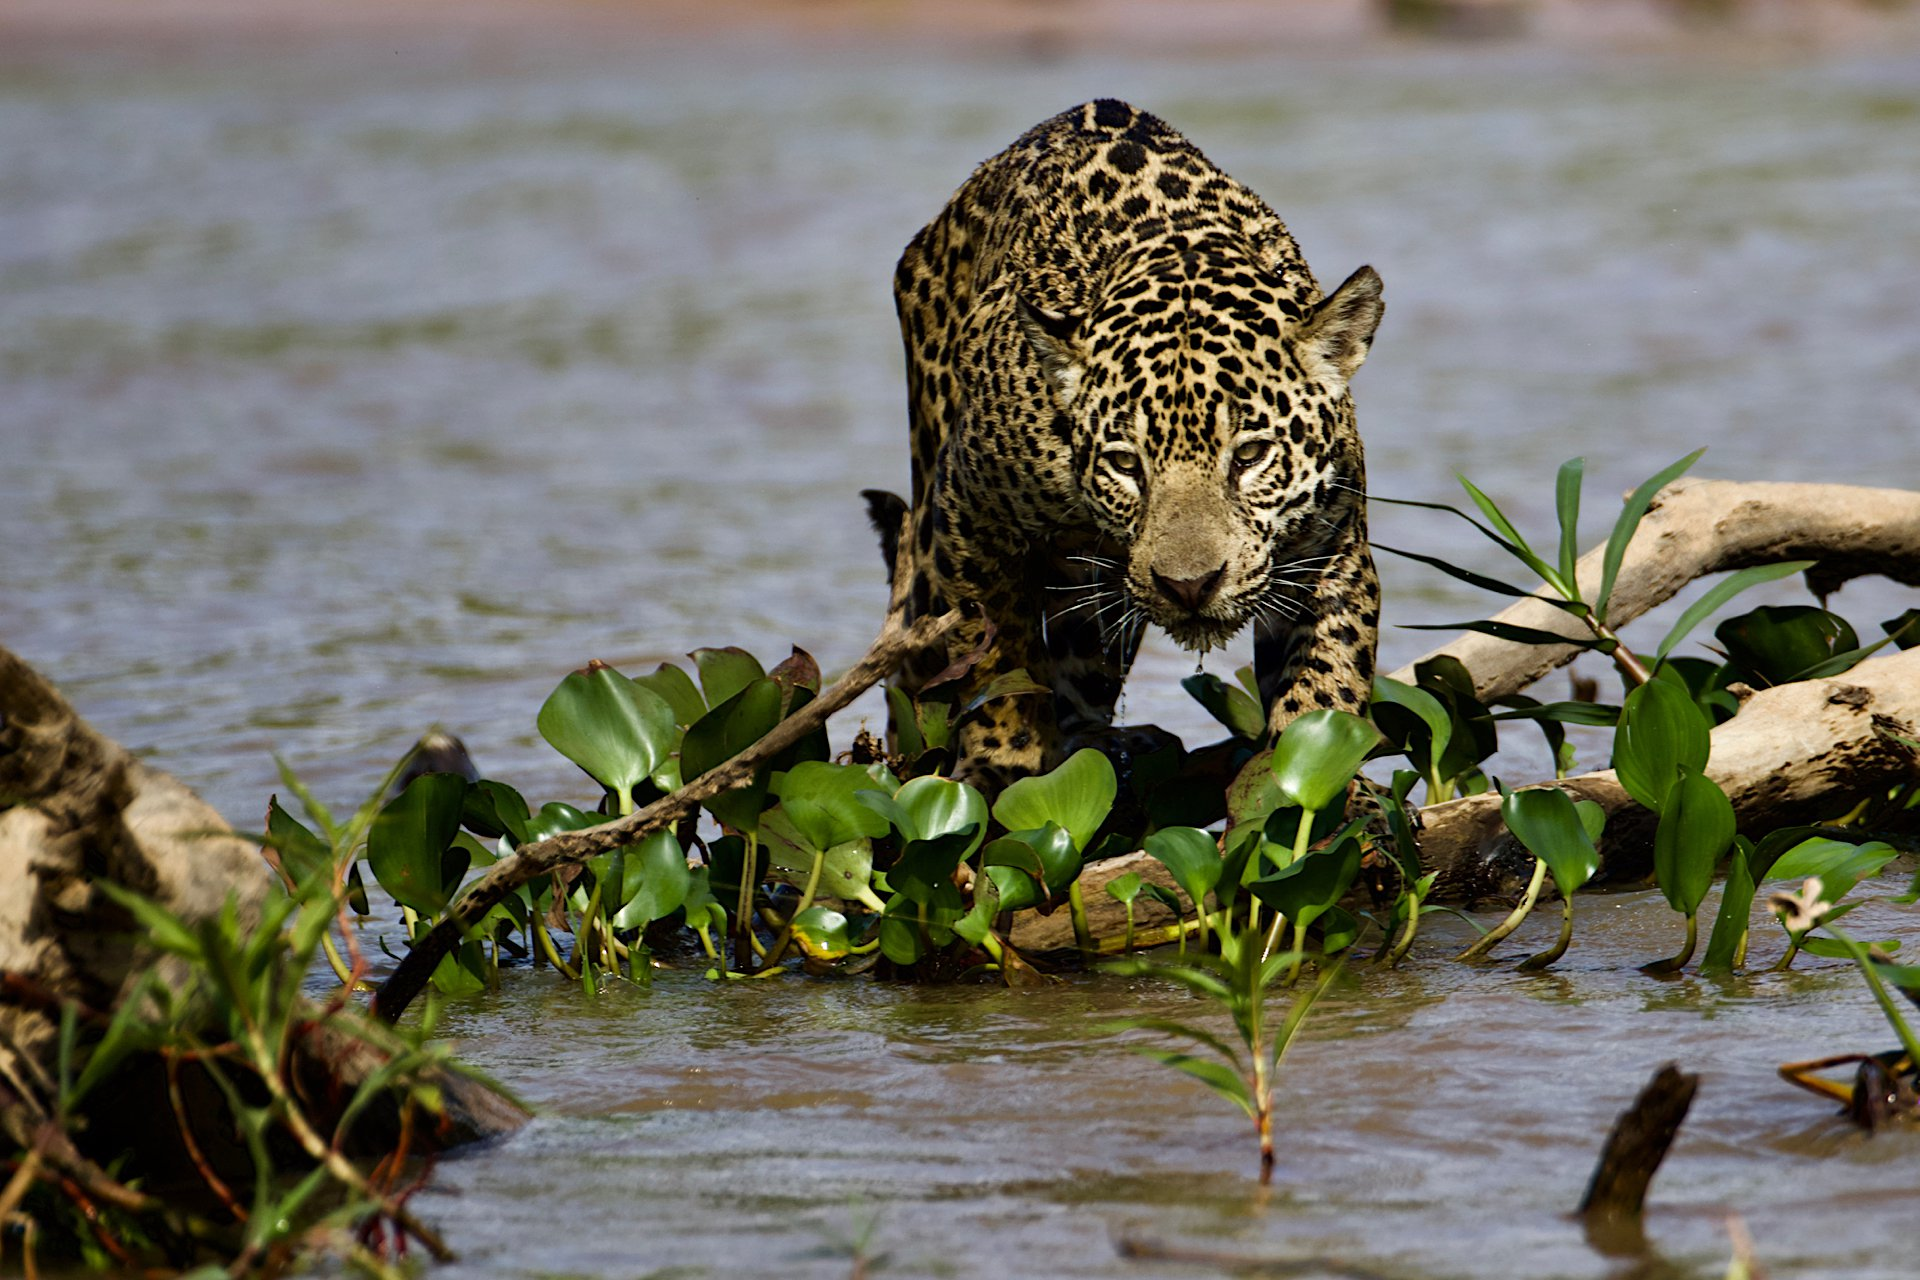 All the best for children! - Jaguar, Brazil, River, The photo, Big cats, South America, Cat family, Predatory animals, Wild animals, The national geographic, wildlife, beauty of nature, Mining, Caiman, Reptiles, Kittens, Longpost